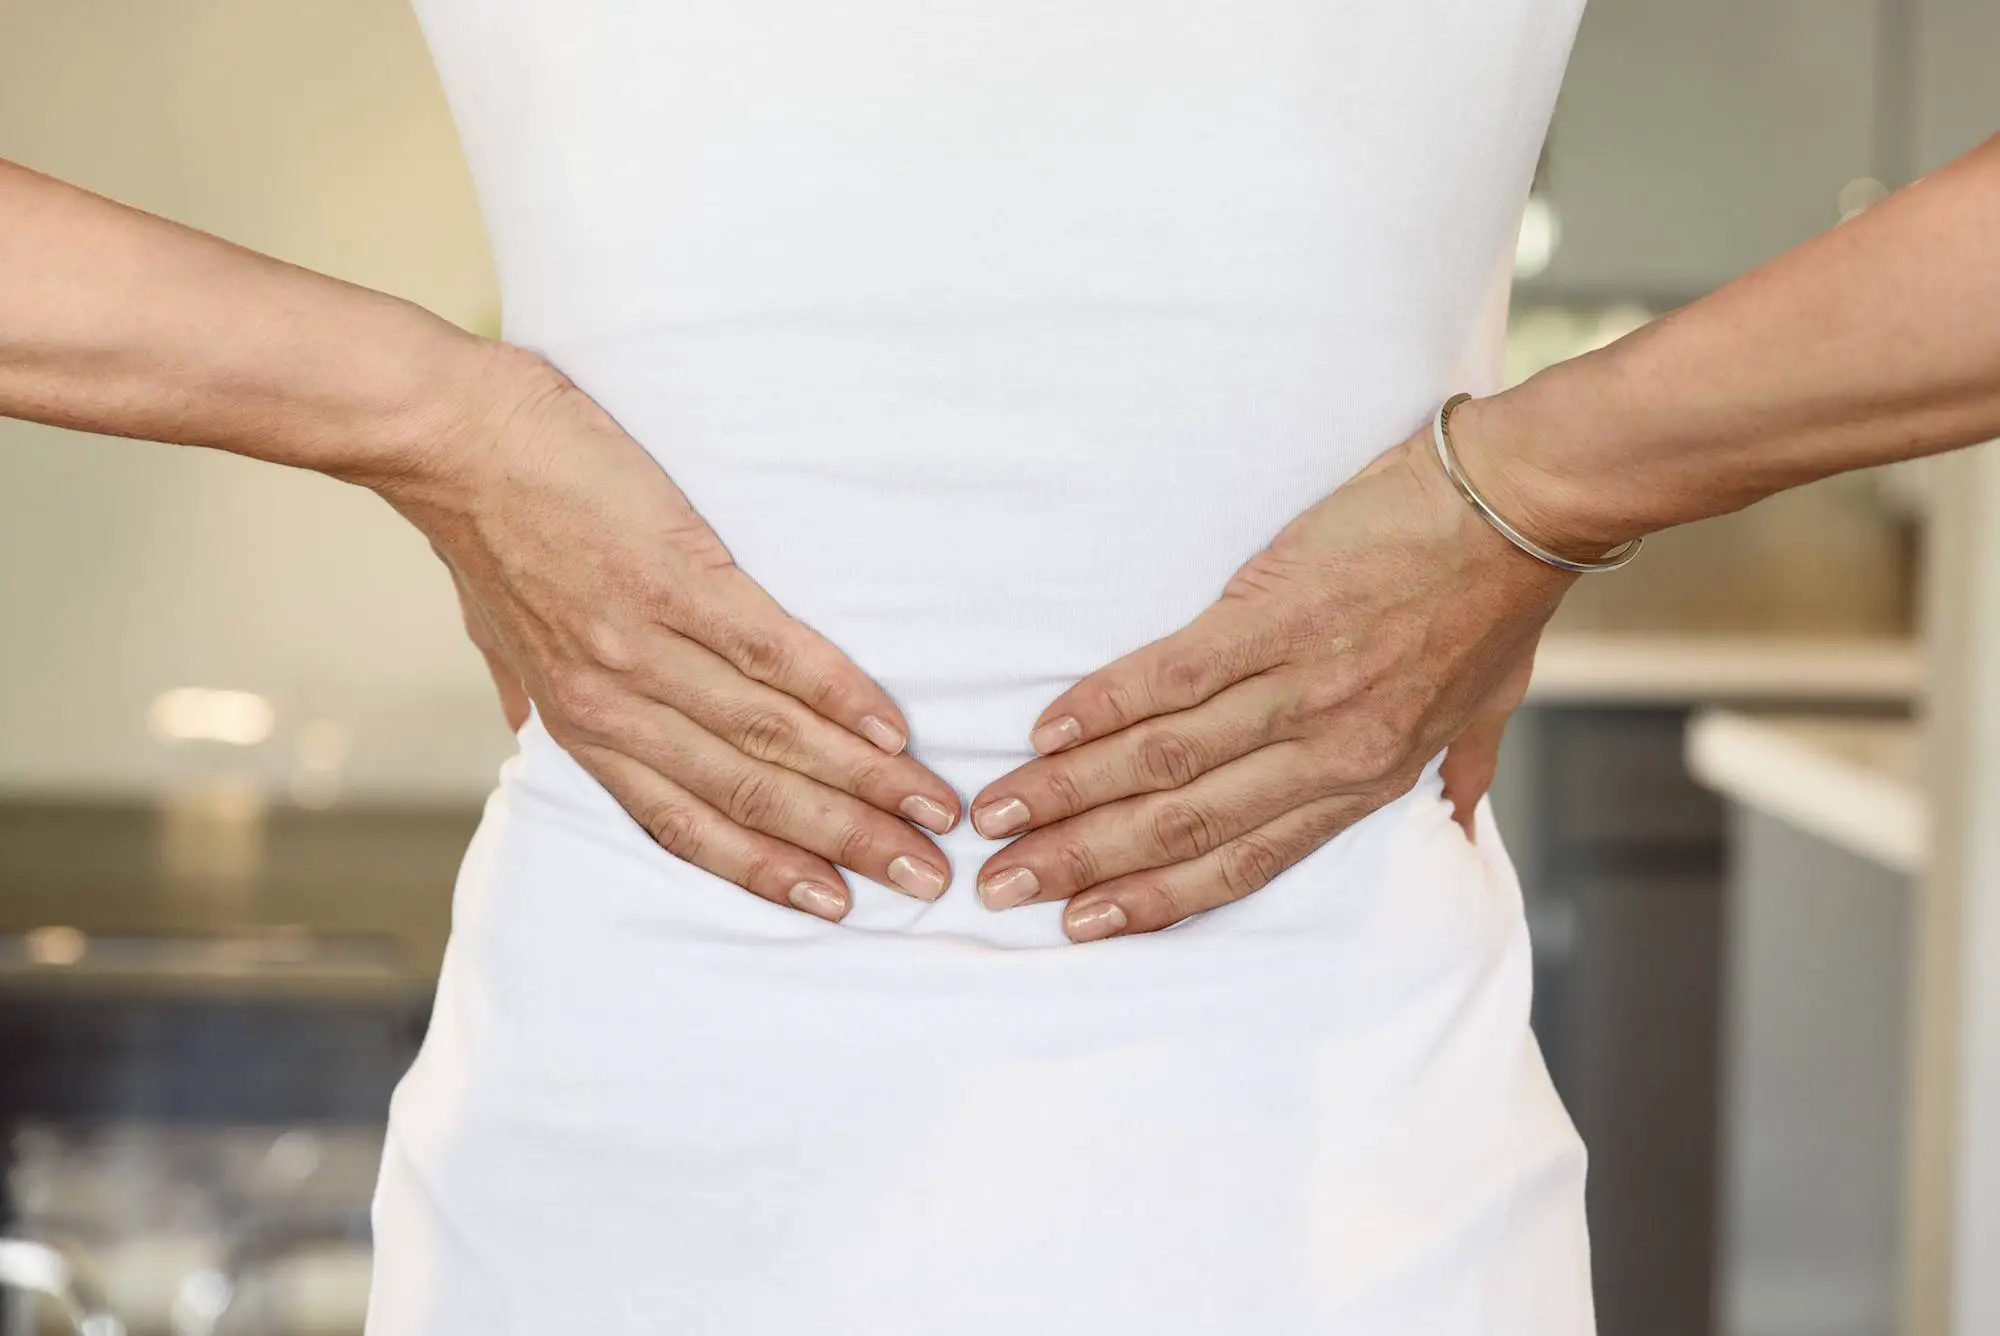 5 Exercises to Treat Low Back Pain and Sciatica